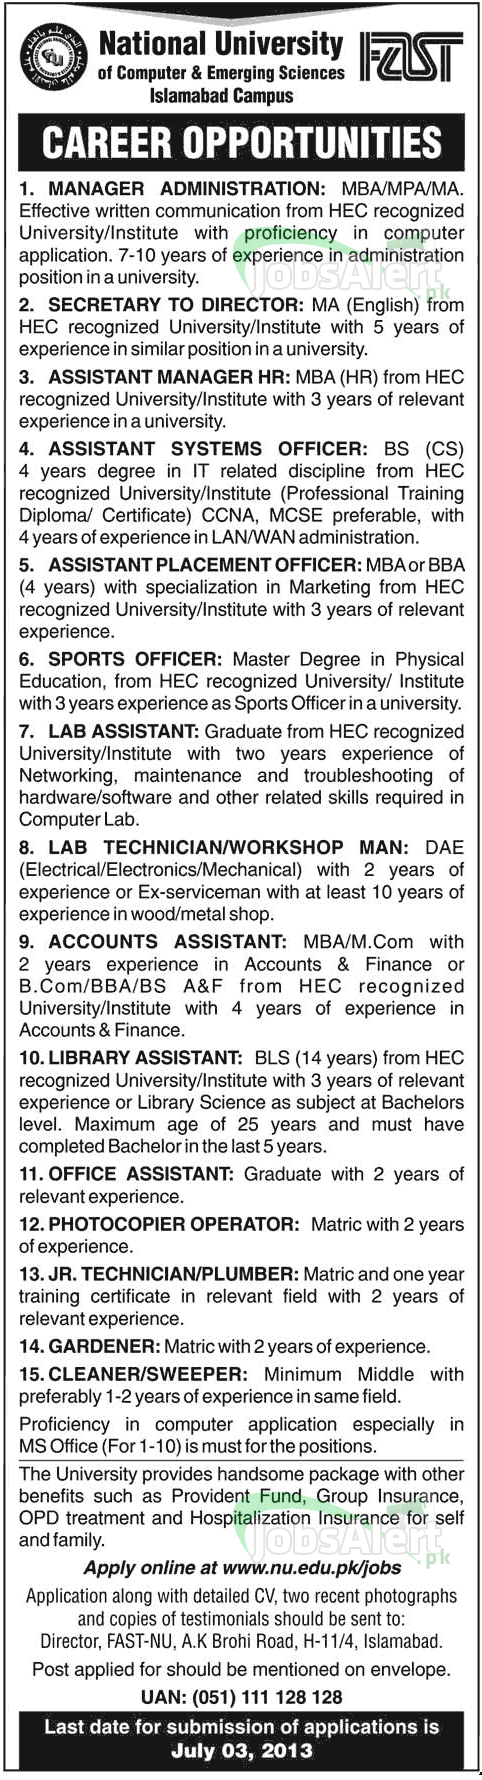 National University Jobs in Islamabad Campus